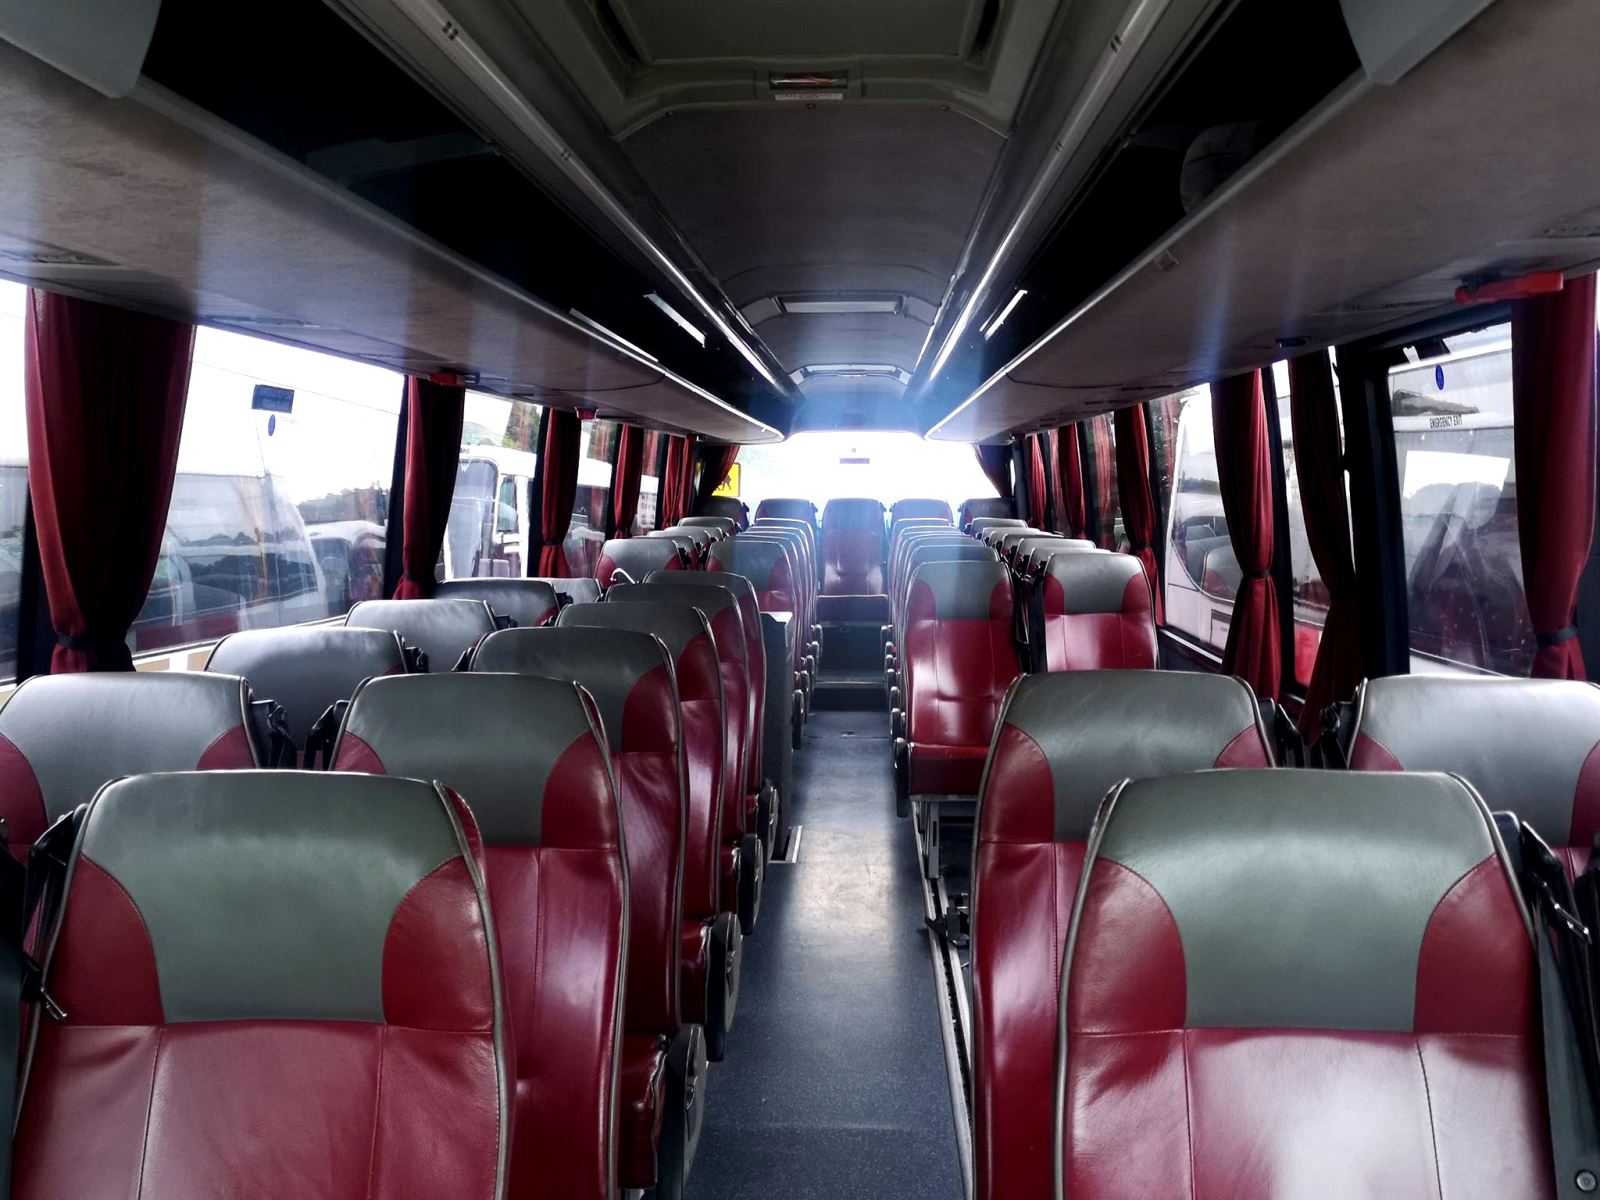 Coach Hire Services at Brother James / Brodyr James